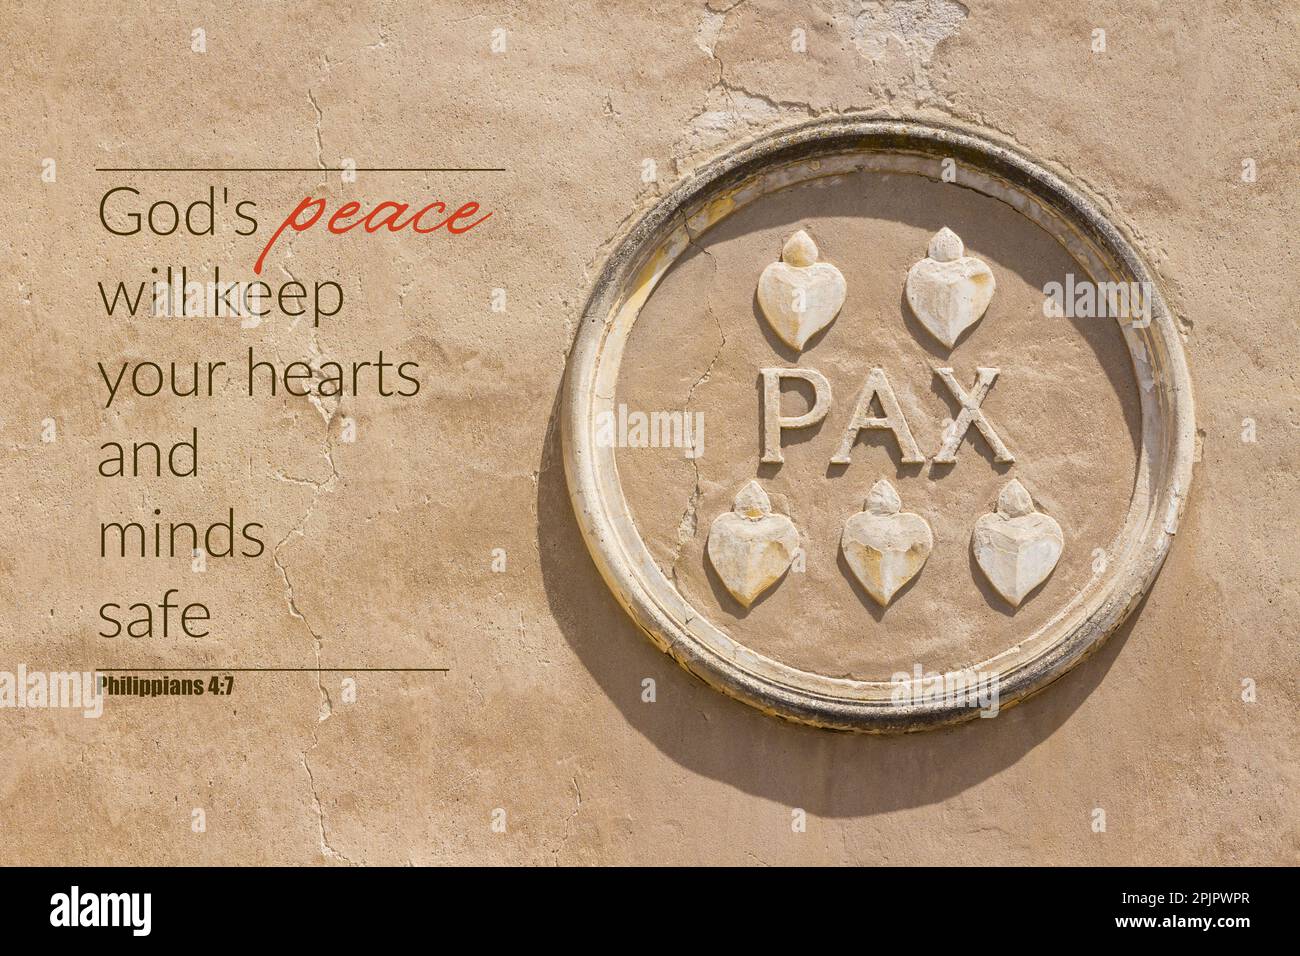 'God's peace will keep your hearts and minds safe' Bible verse quote. Pax (Peace) caption in stone circle frame on wall Stock Photo